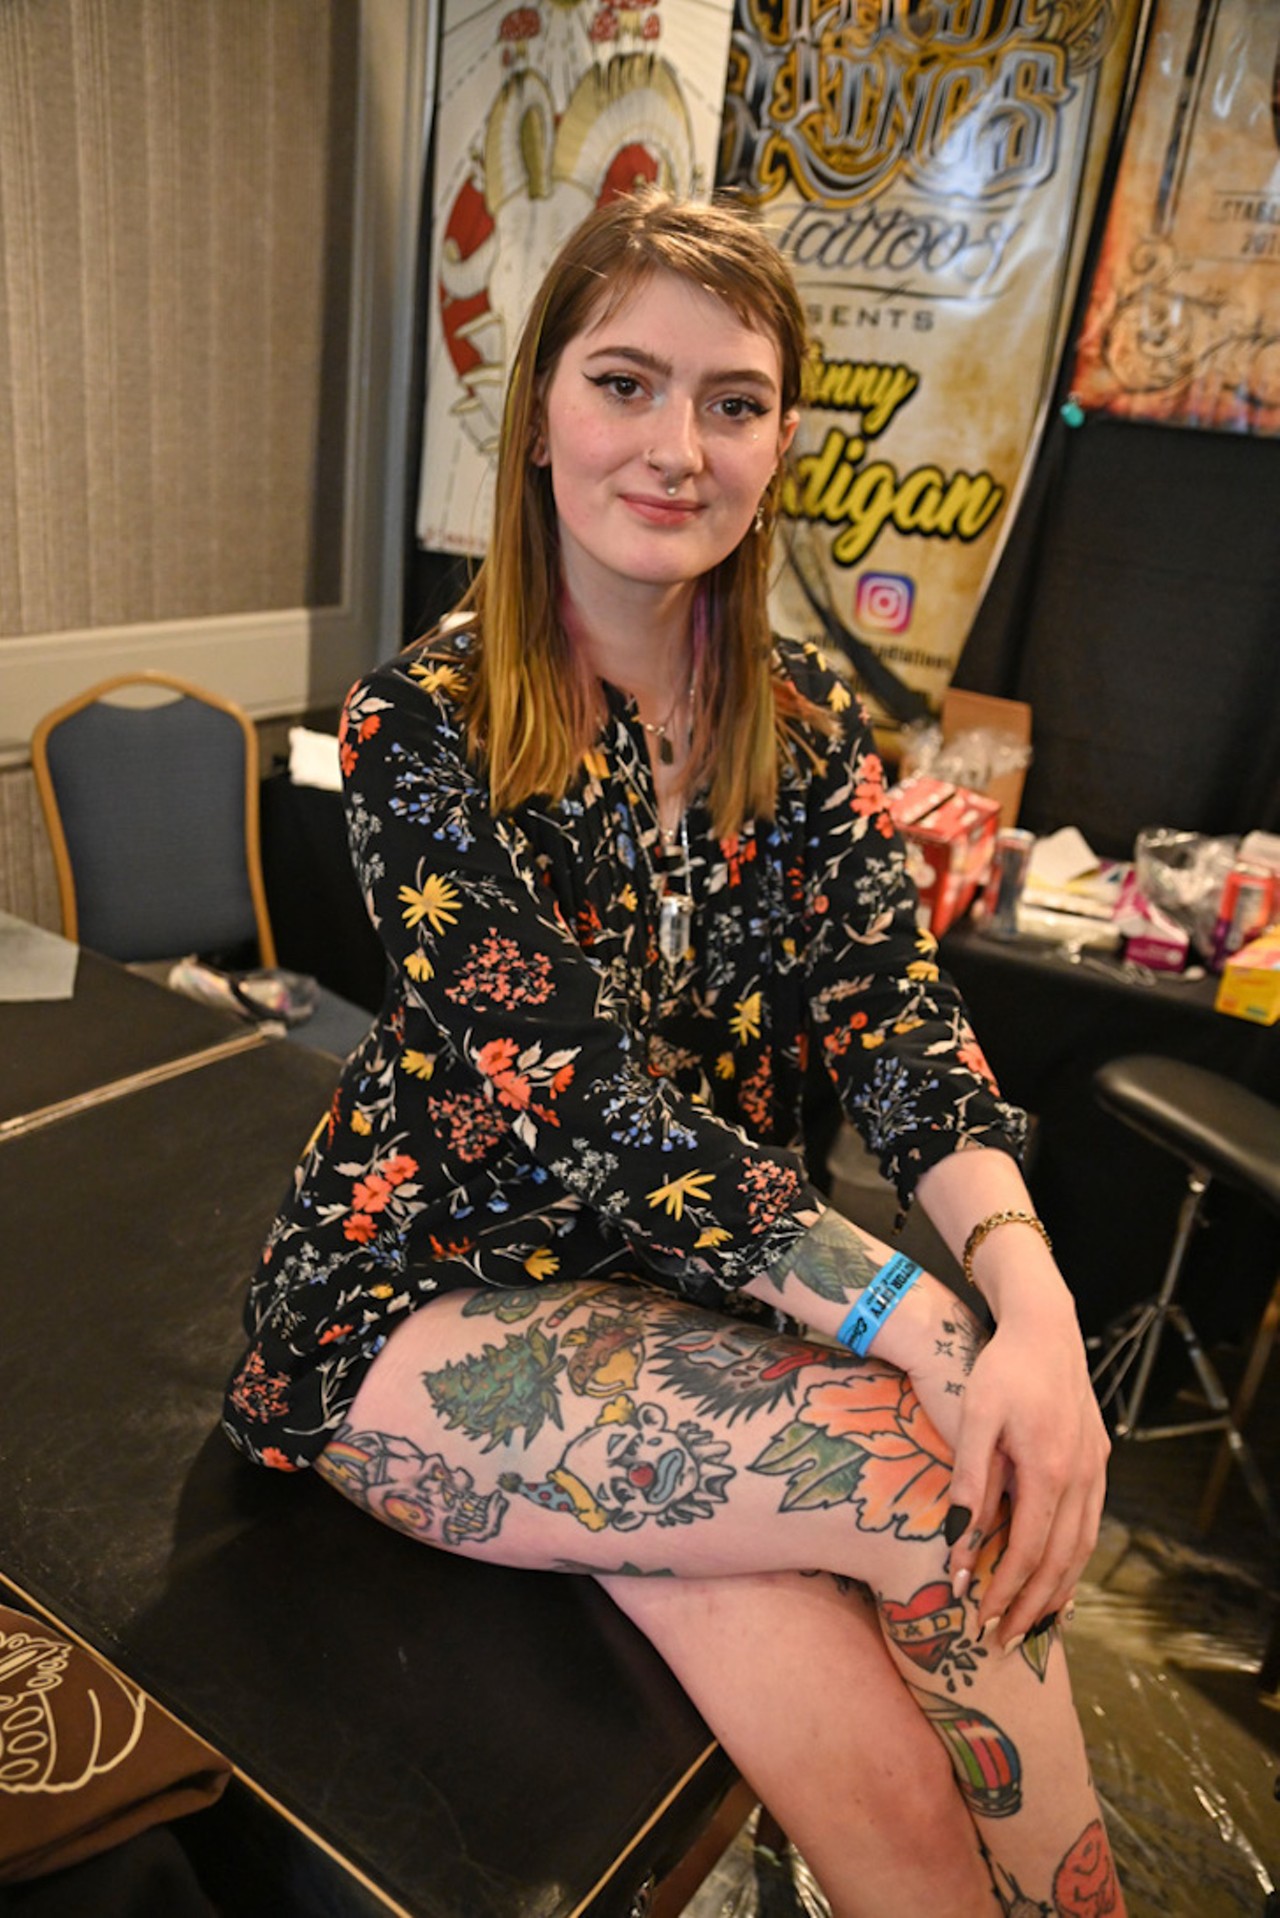 All the beautiful people we saw at the Motor City Tattoo Expo